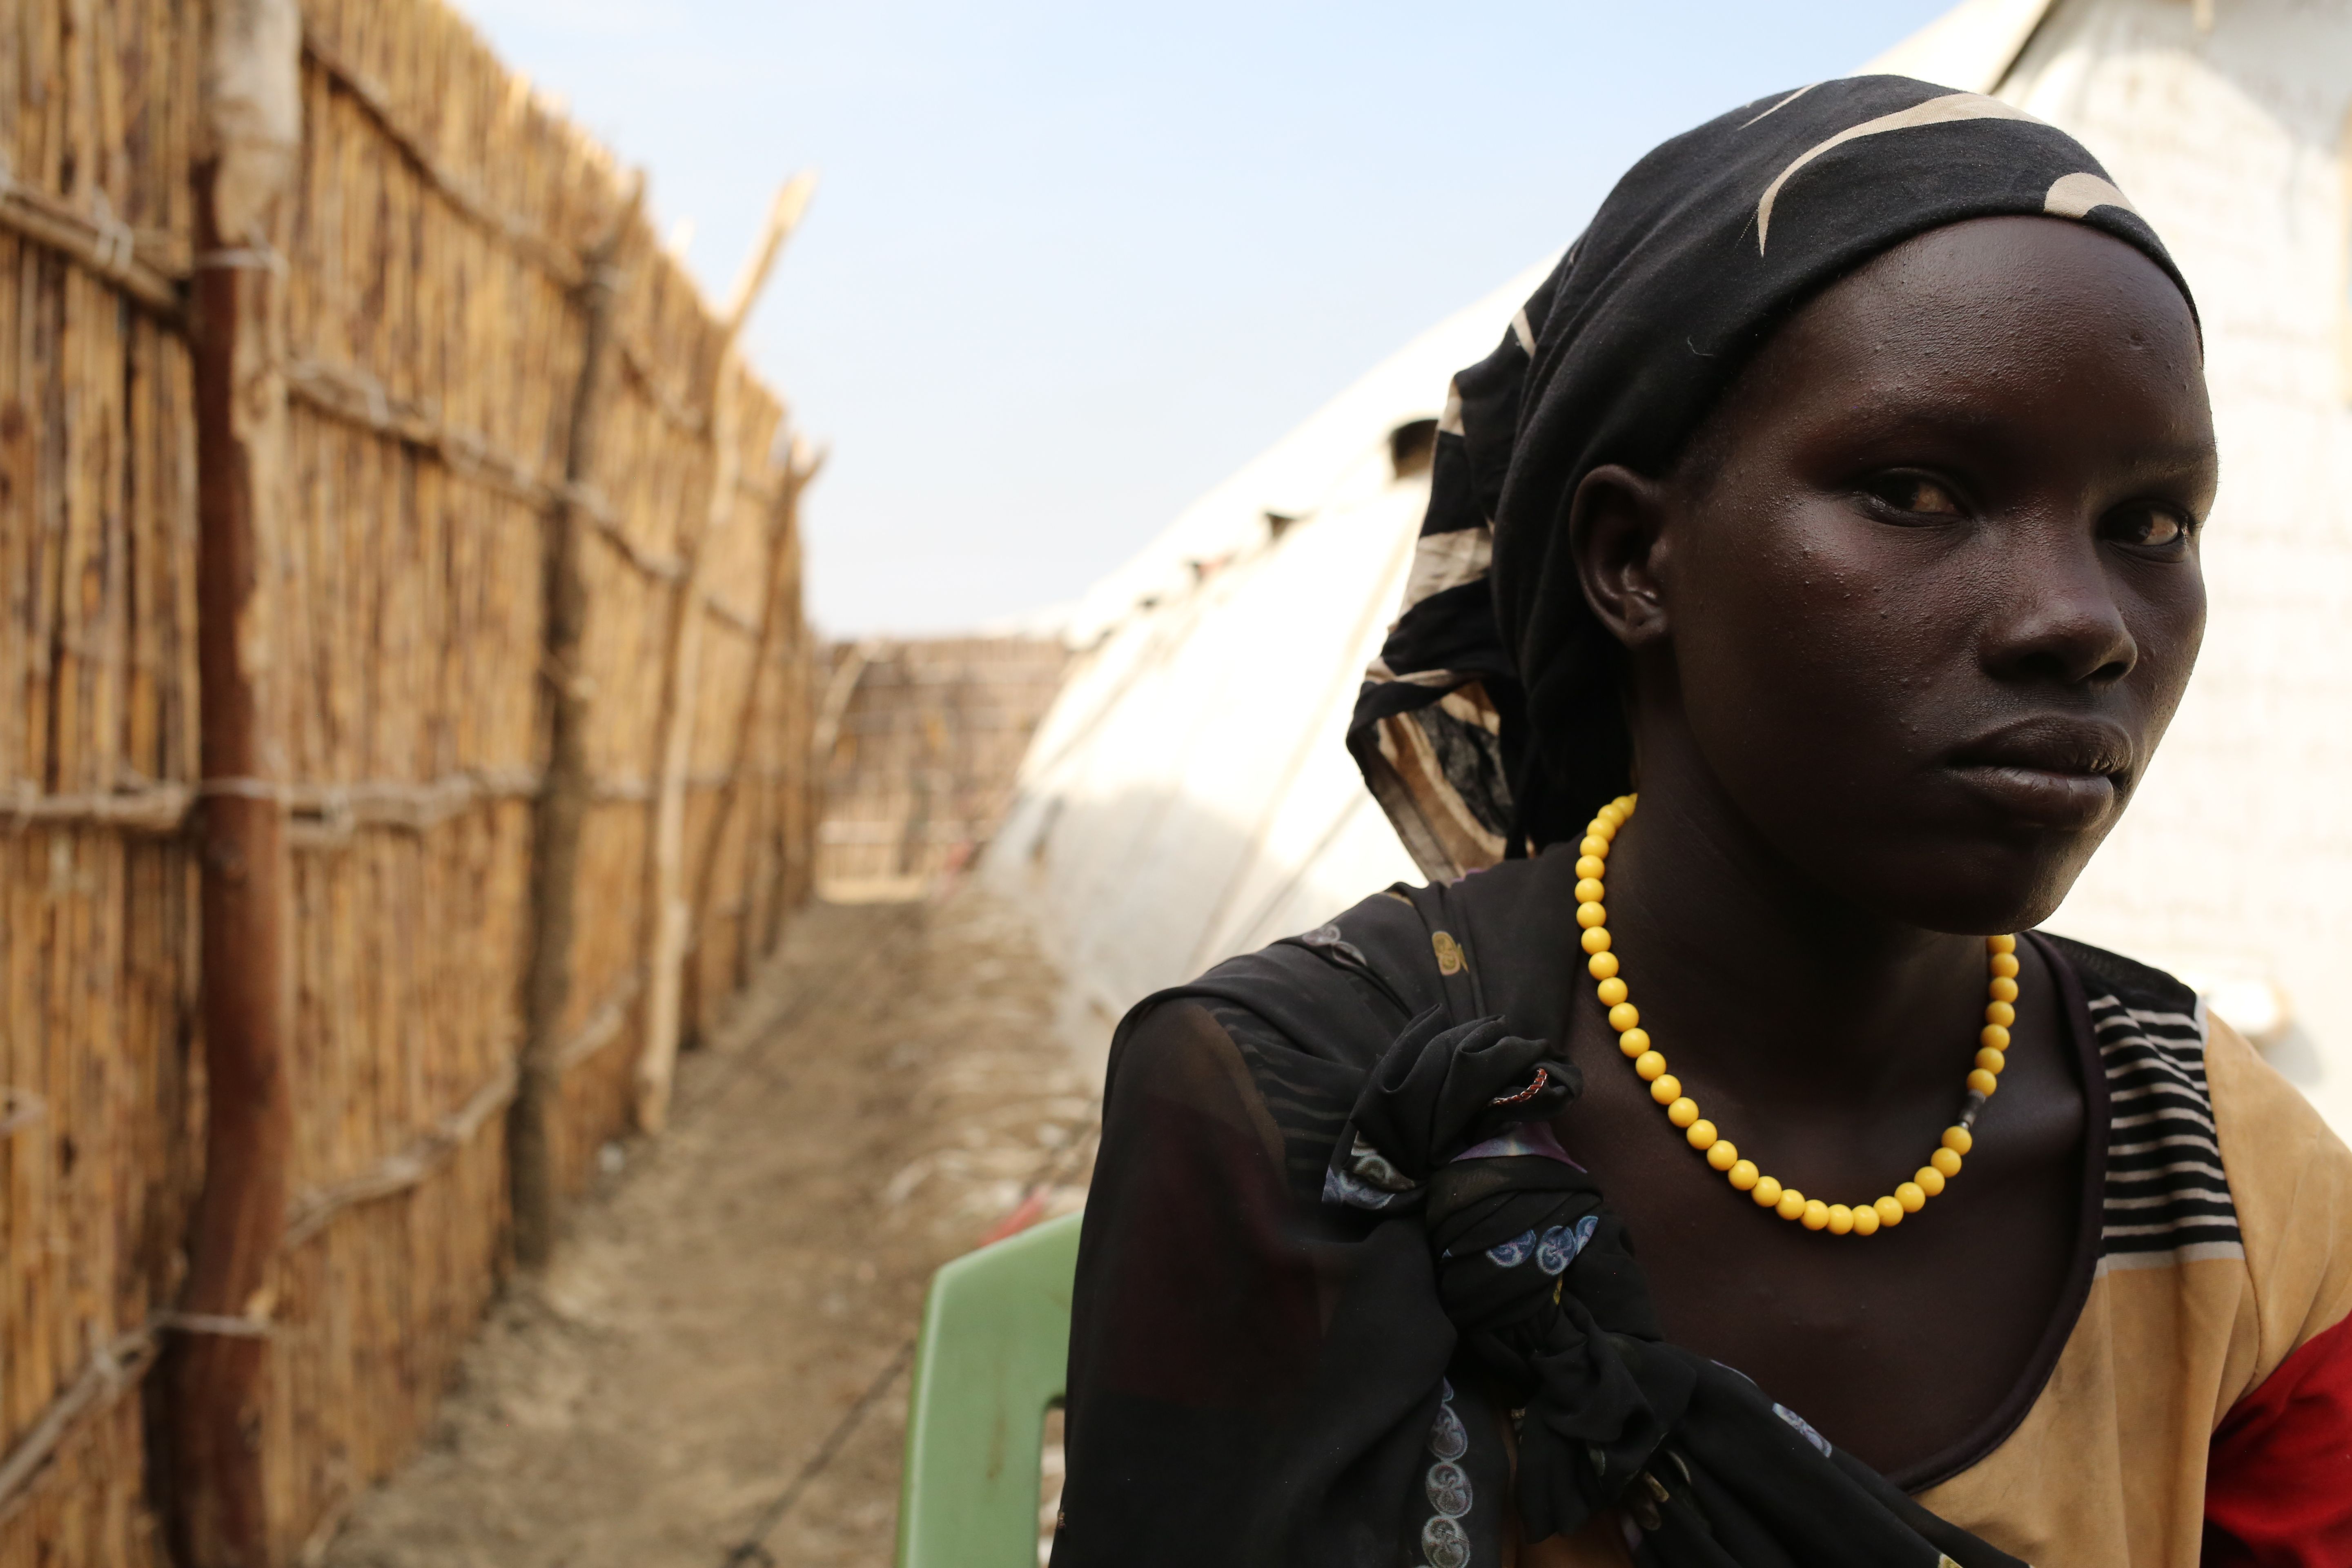 Elizabeth poses for a photo on Dec. 15, 2015 at the U.N. base in Bentiu, South Sudan. She fled recent fighting in Leer County. Image by Cassandra Vinograd. South Sudan, 2016.